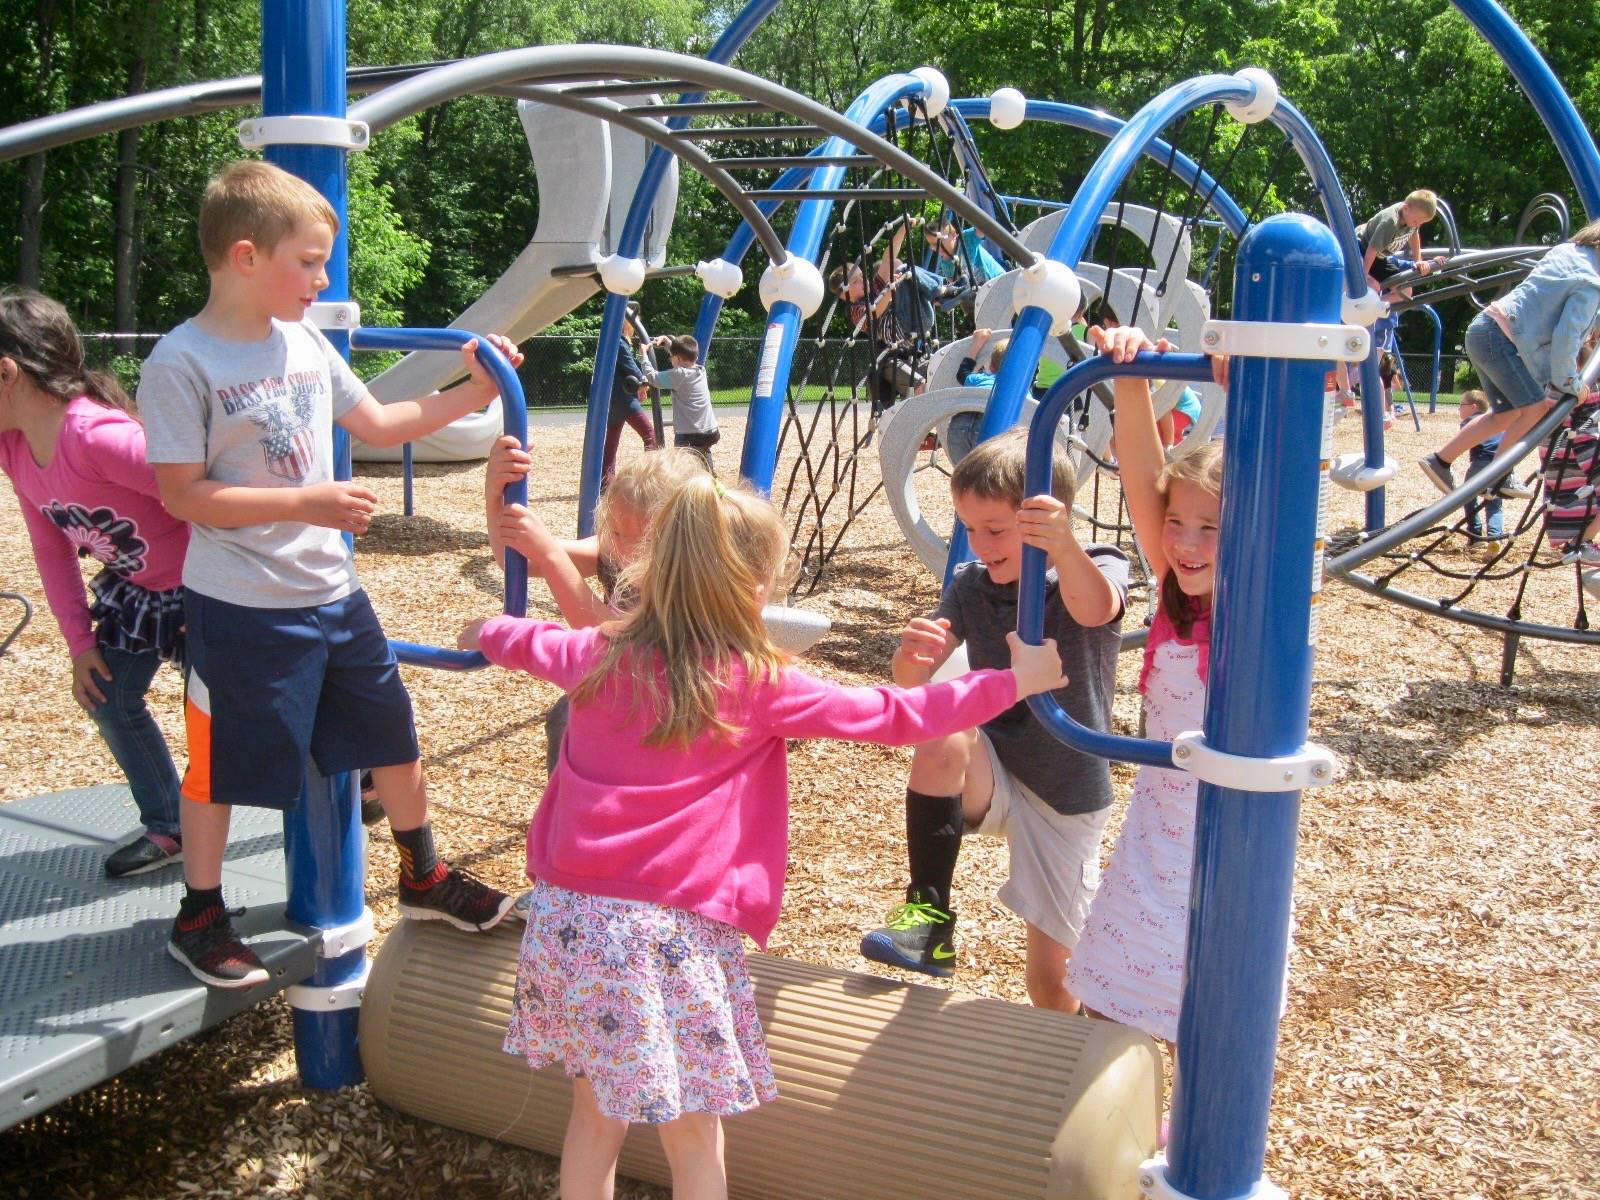 Students playing on playground.